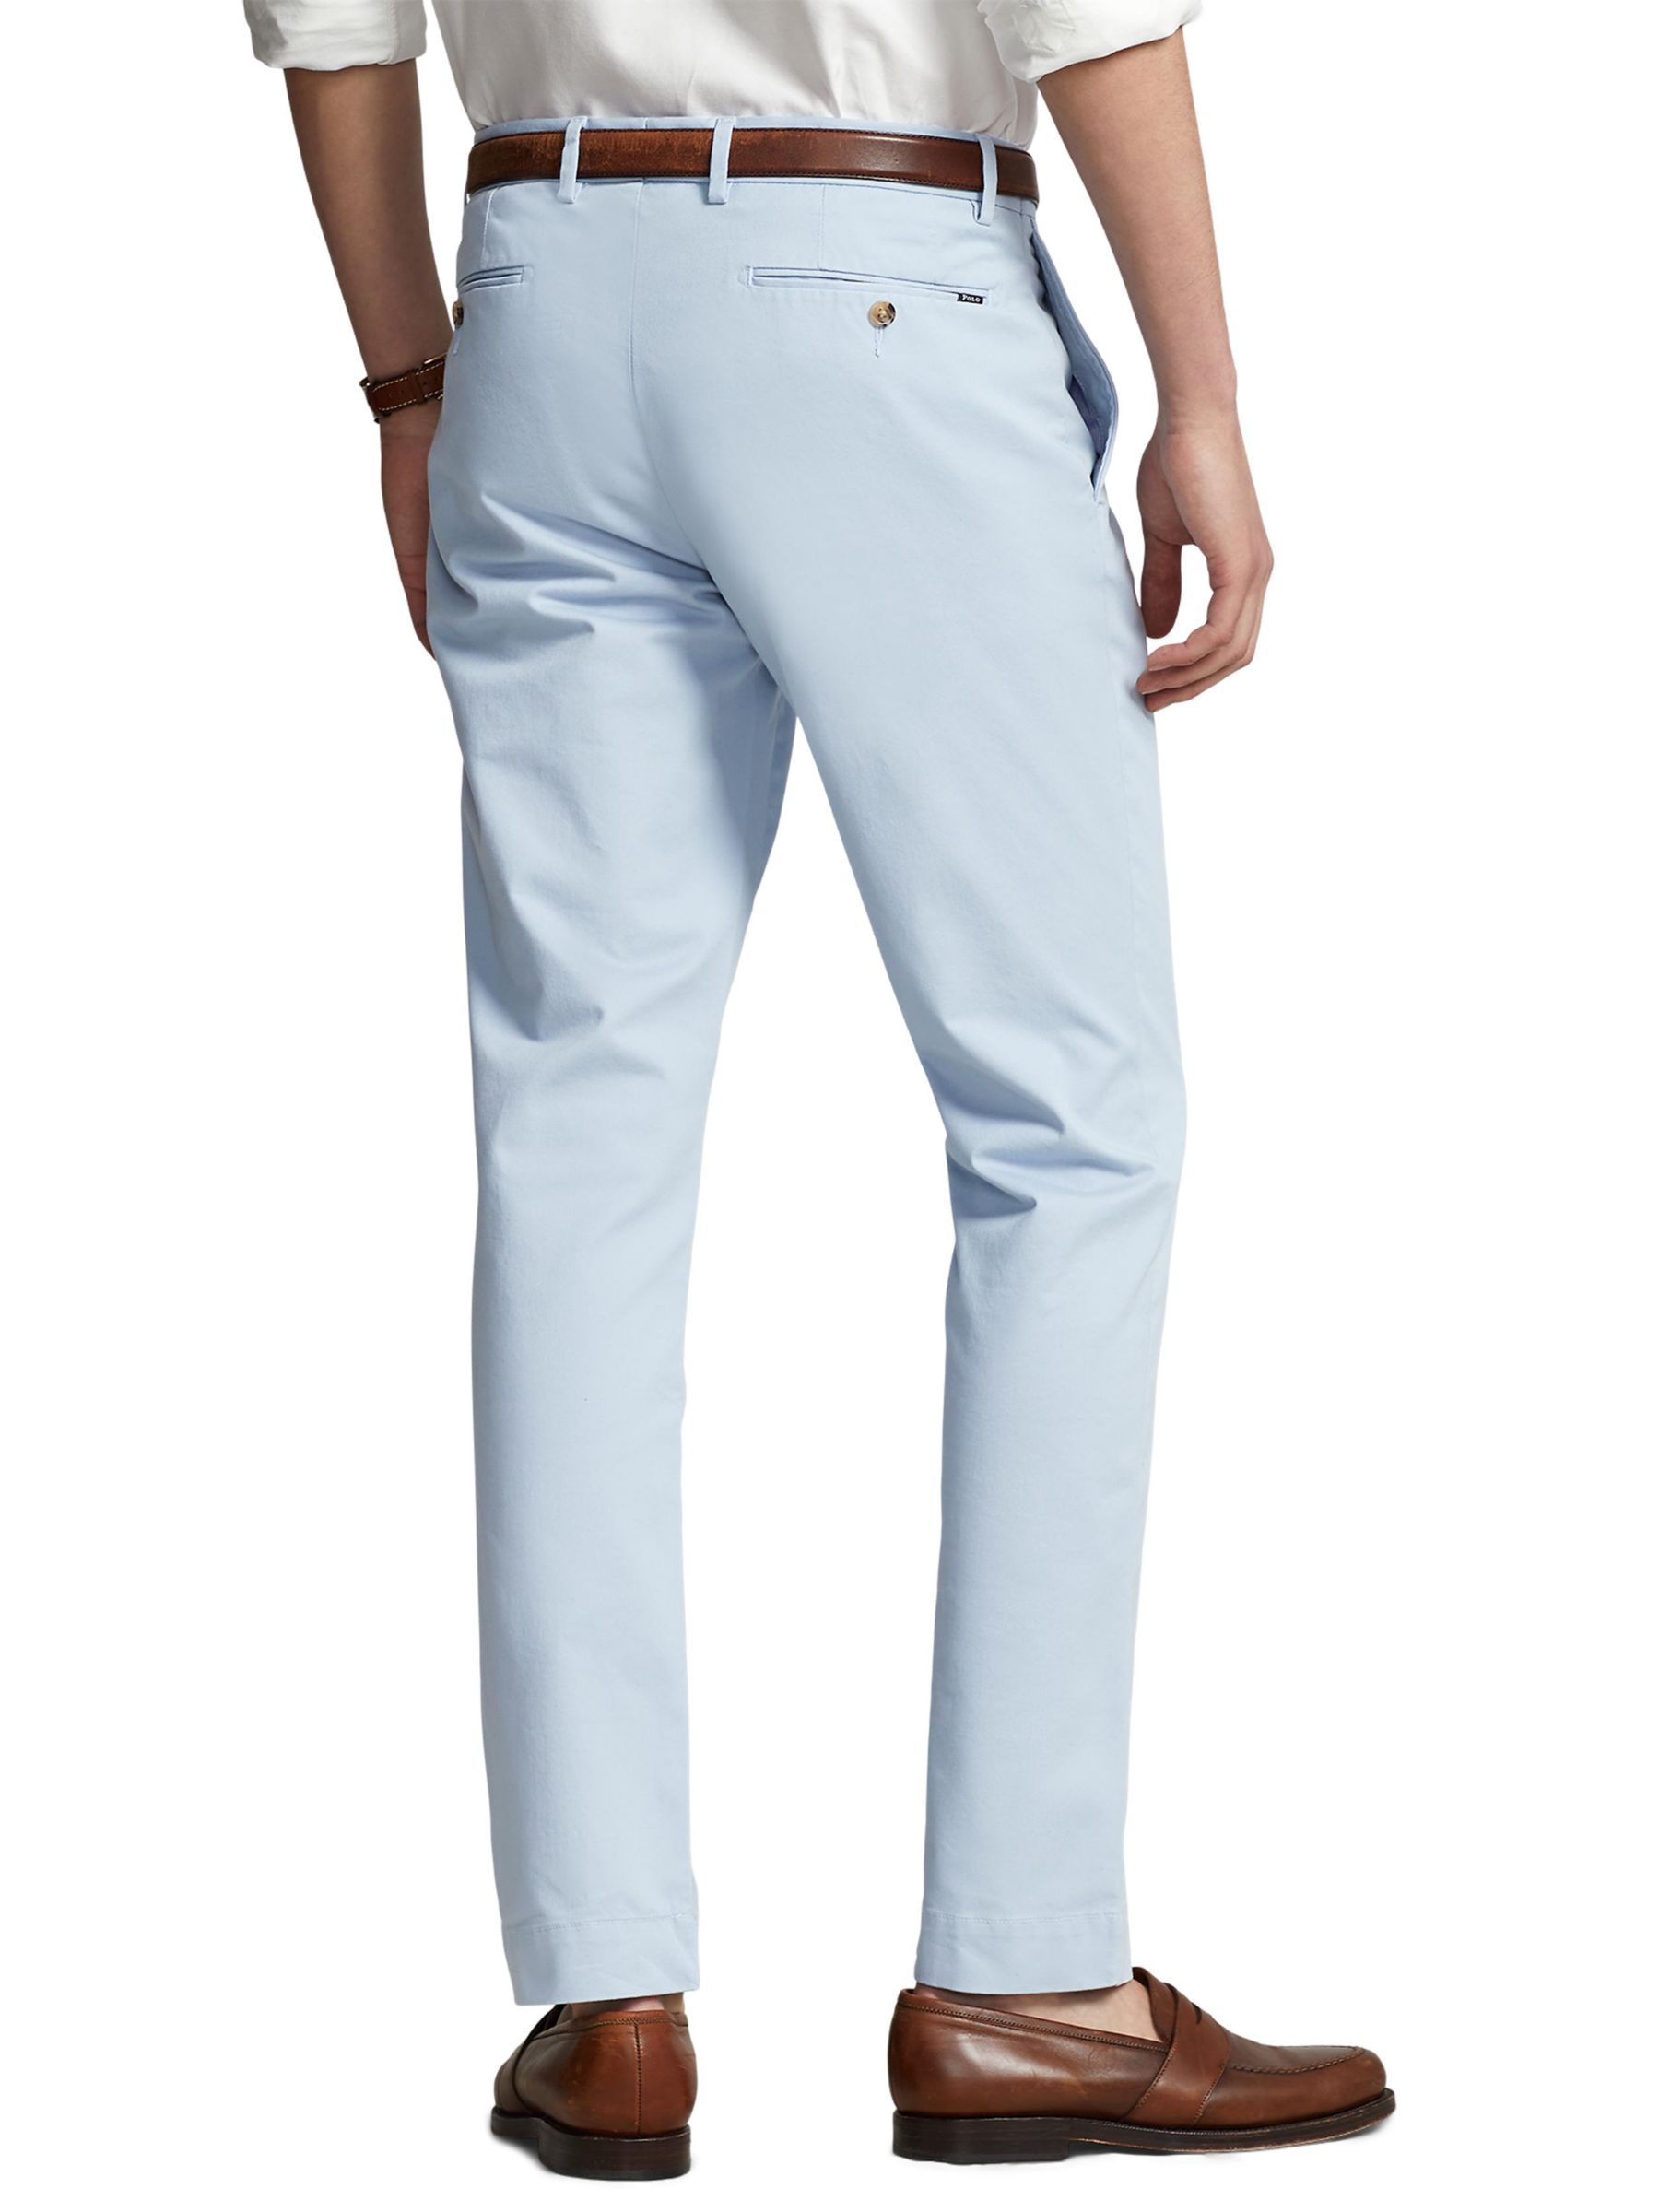 Buy Polo Ralph Lauren Stretch Slim Fit Flat Front Trousers Online at johnlewis.com